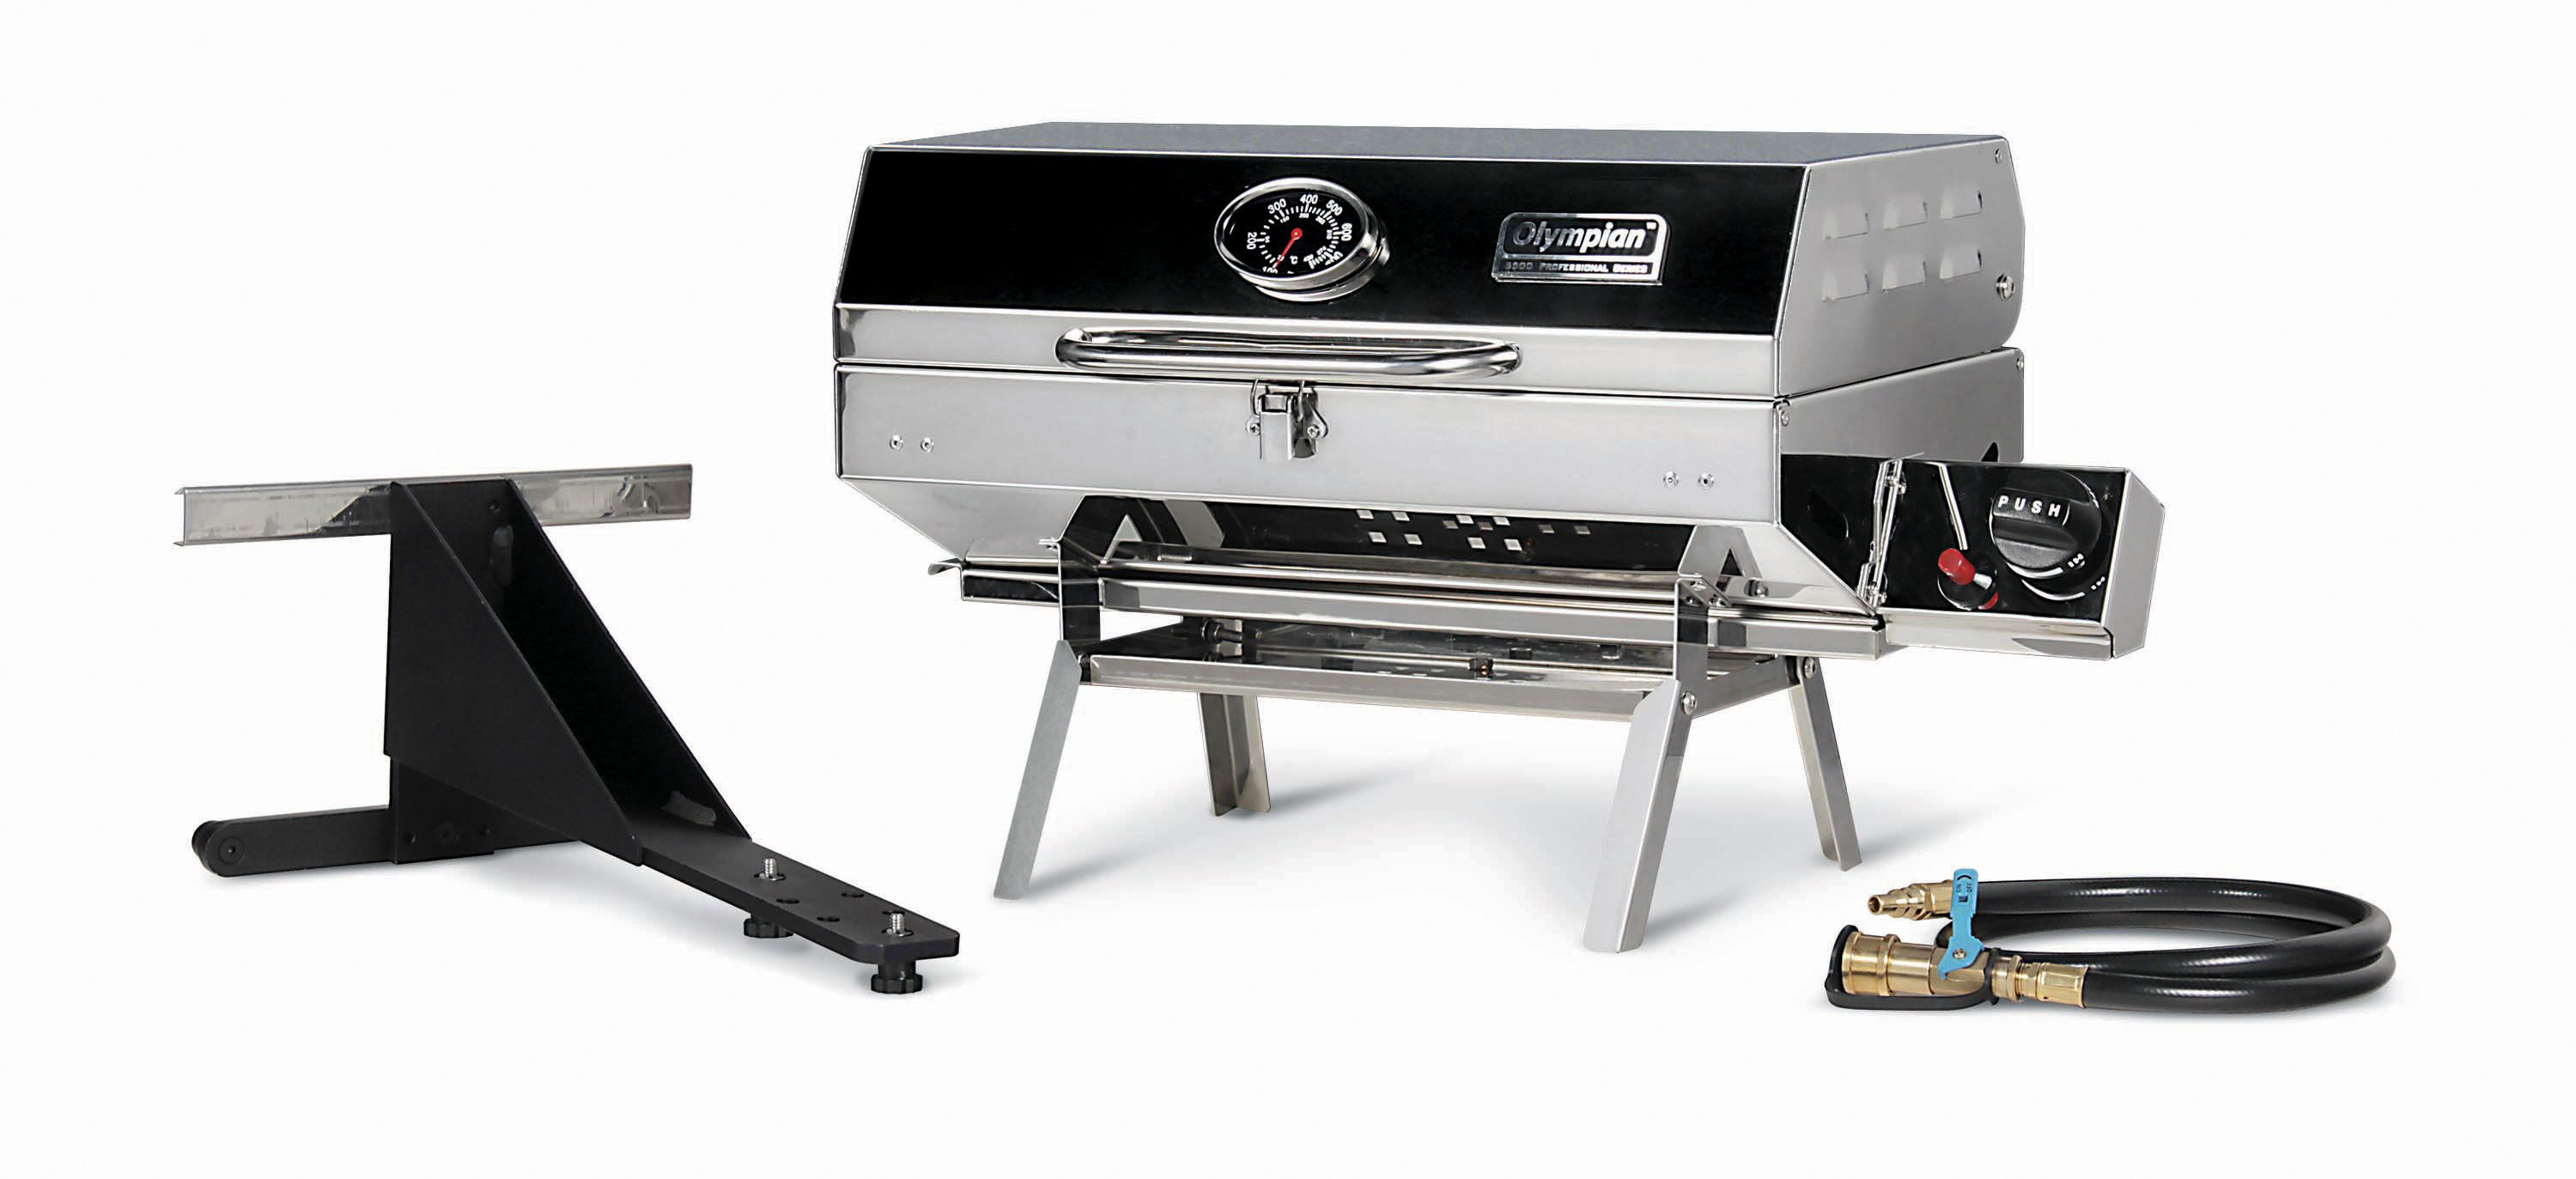 Camco 57305 Olympian 5500 Stainless Steel Portable Gas Grill for RV and Outdoor Use - image 1 of 17